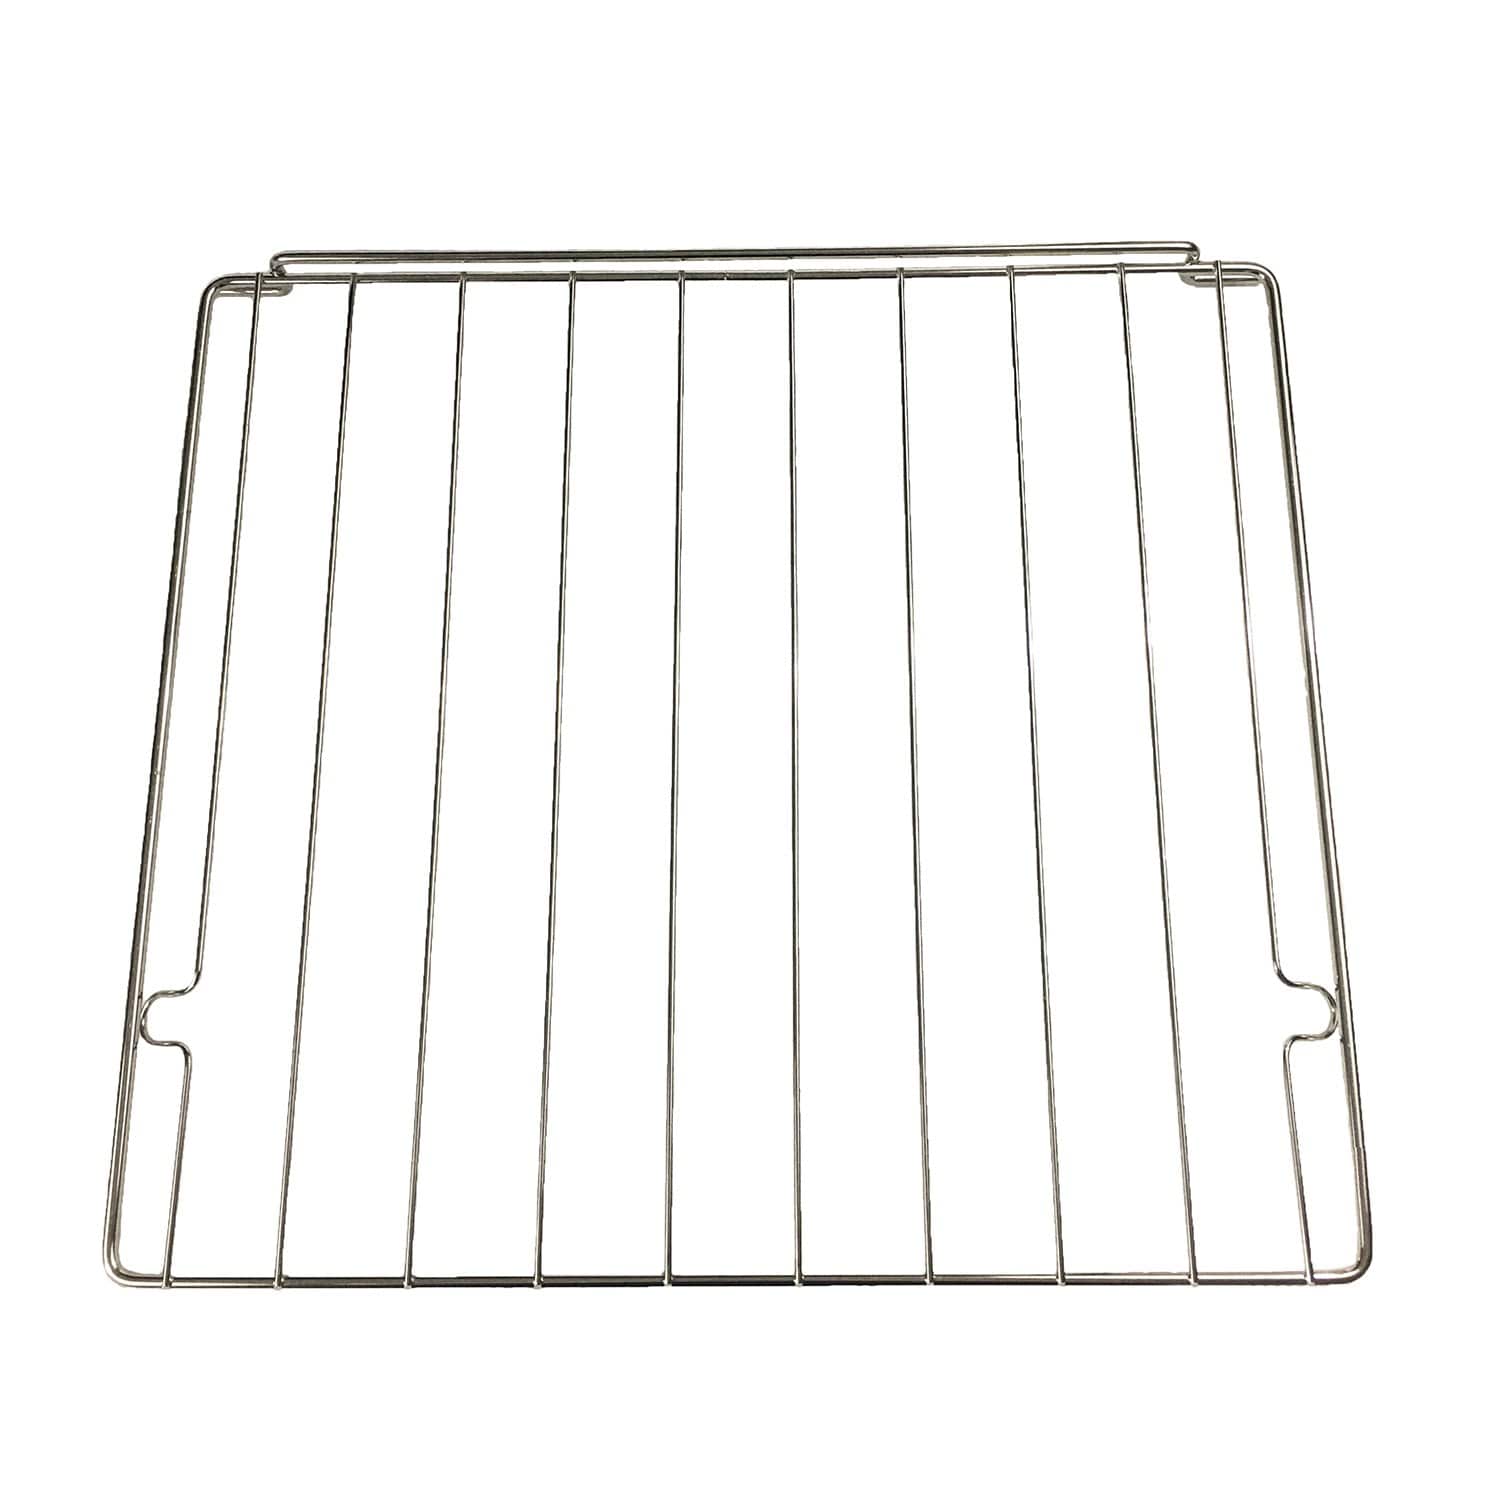 Dometic 54111 Oven Rack Replacement